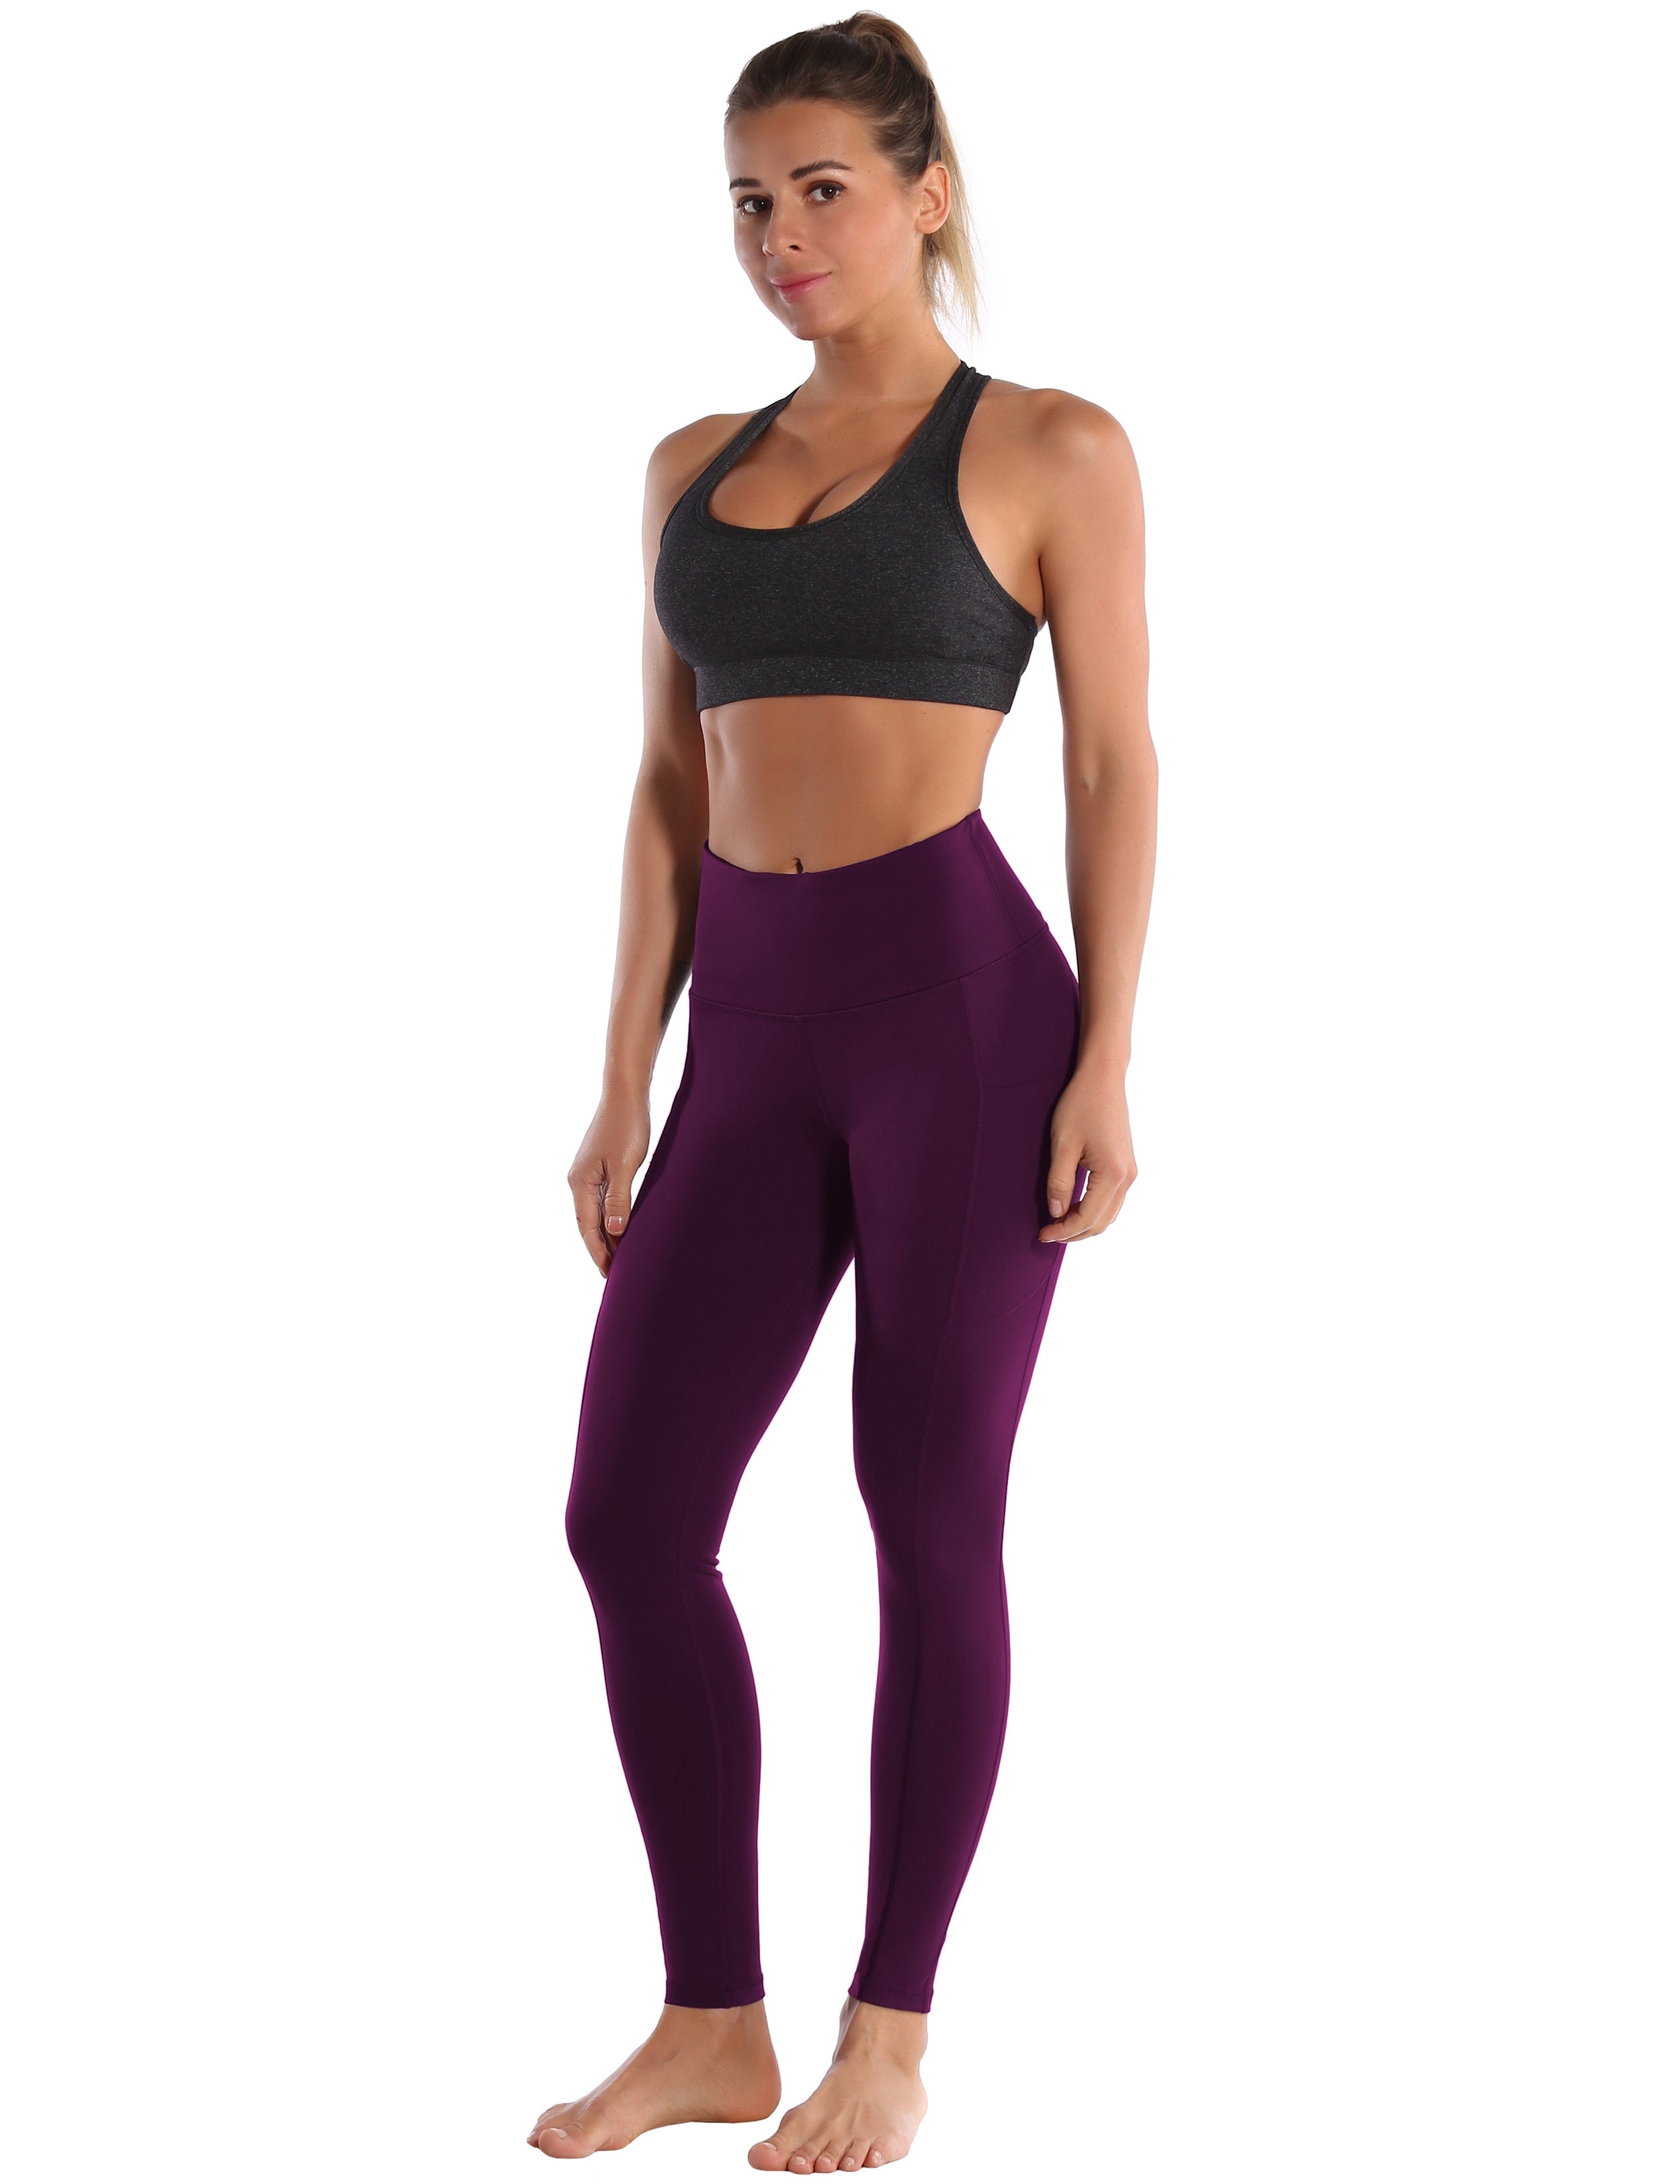 Hip Line Side Pockets Jogging Pants grapevine Sexy Hip Line Side Pockets 75%Nylon/25%Spandex Fabric doesn't attract lint easily 4-way stretch No see-through Moisture-wicking Tummy control Inner pocket Two lengths